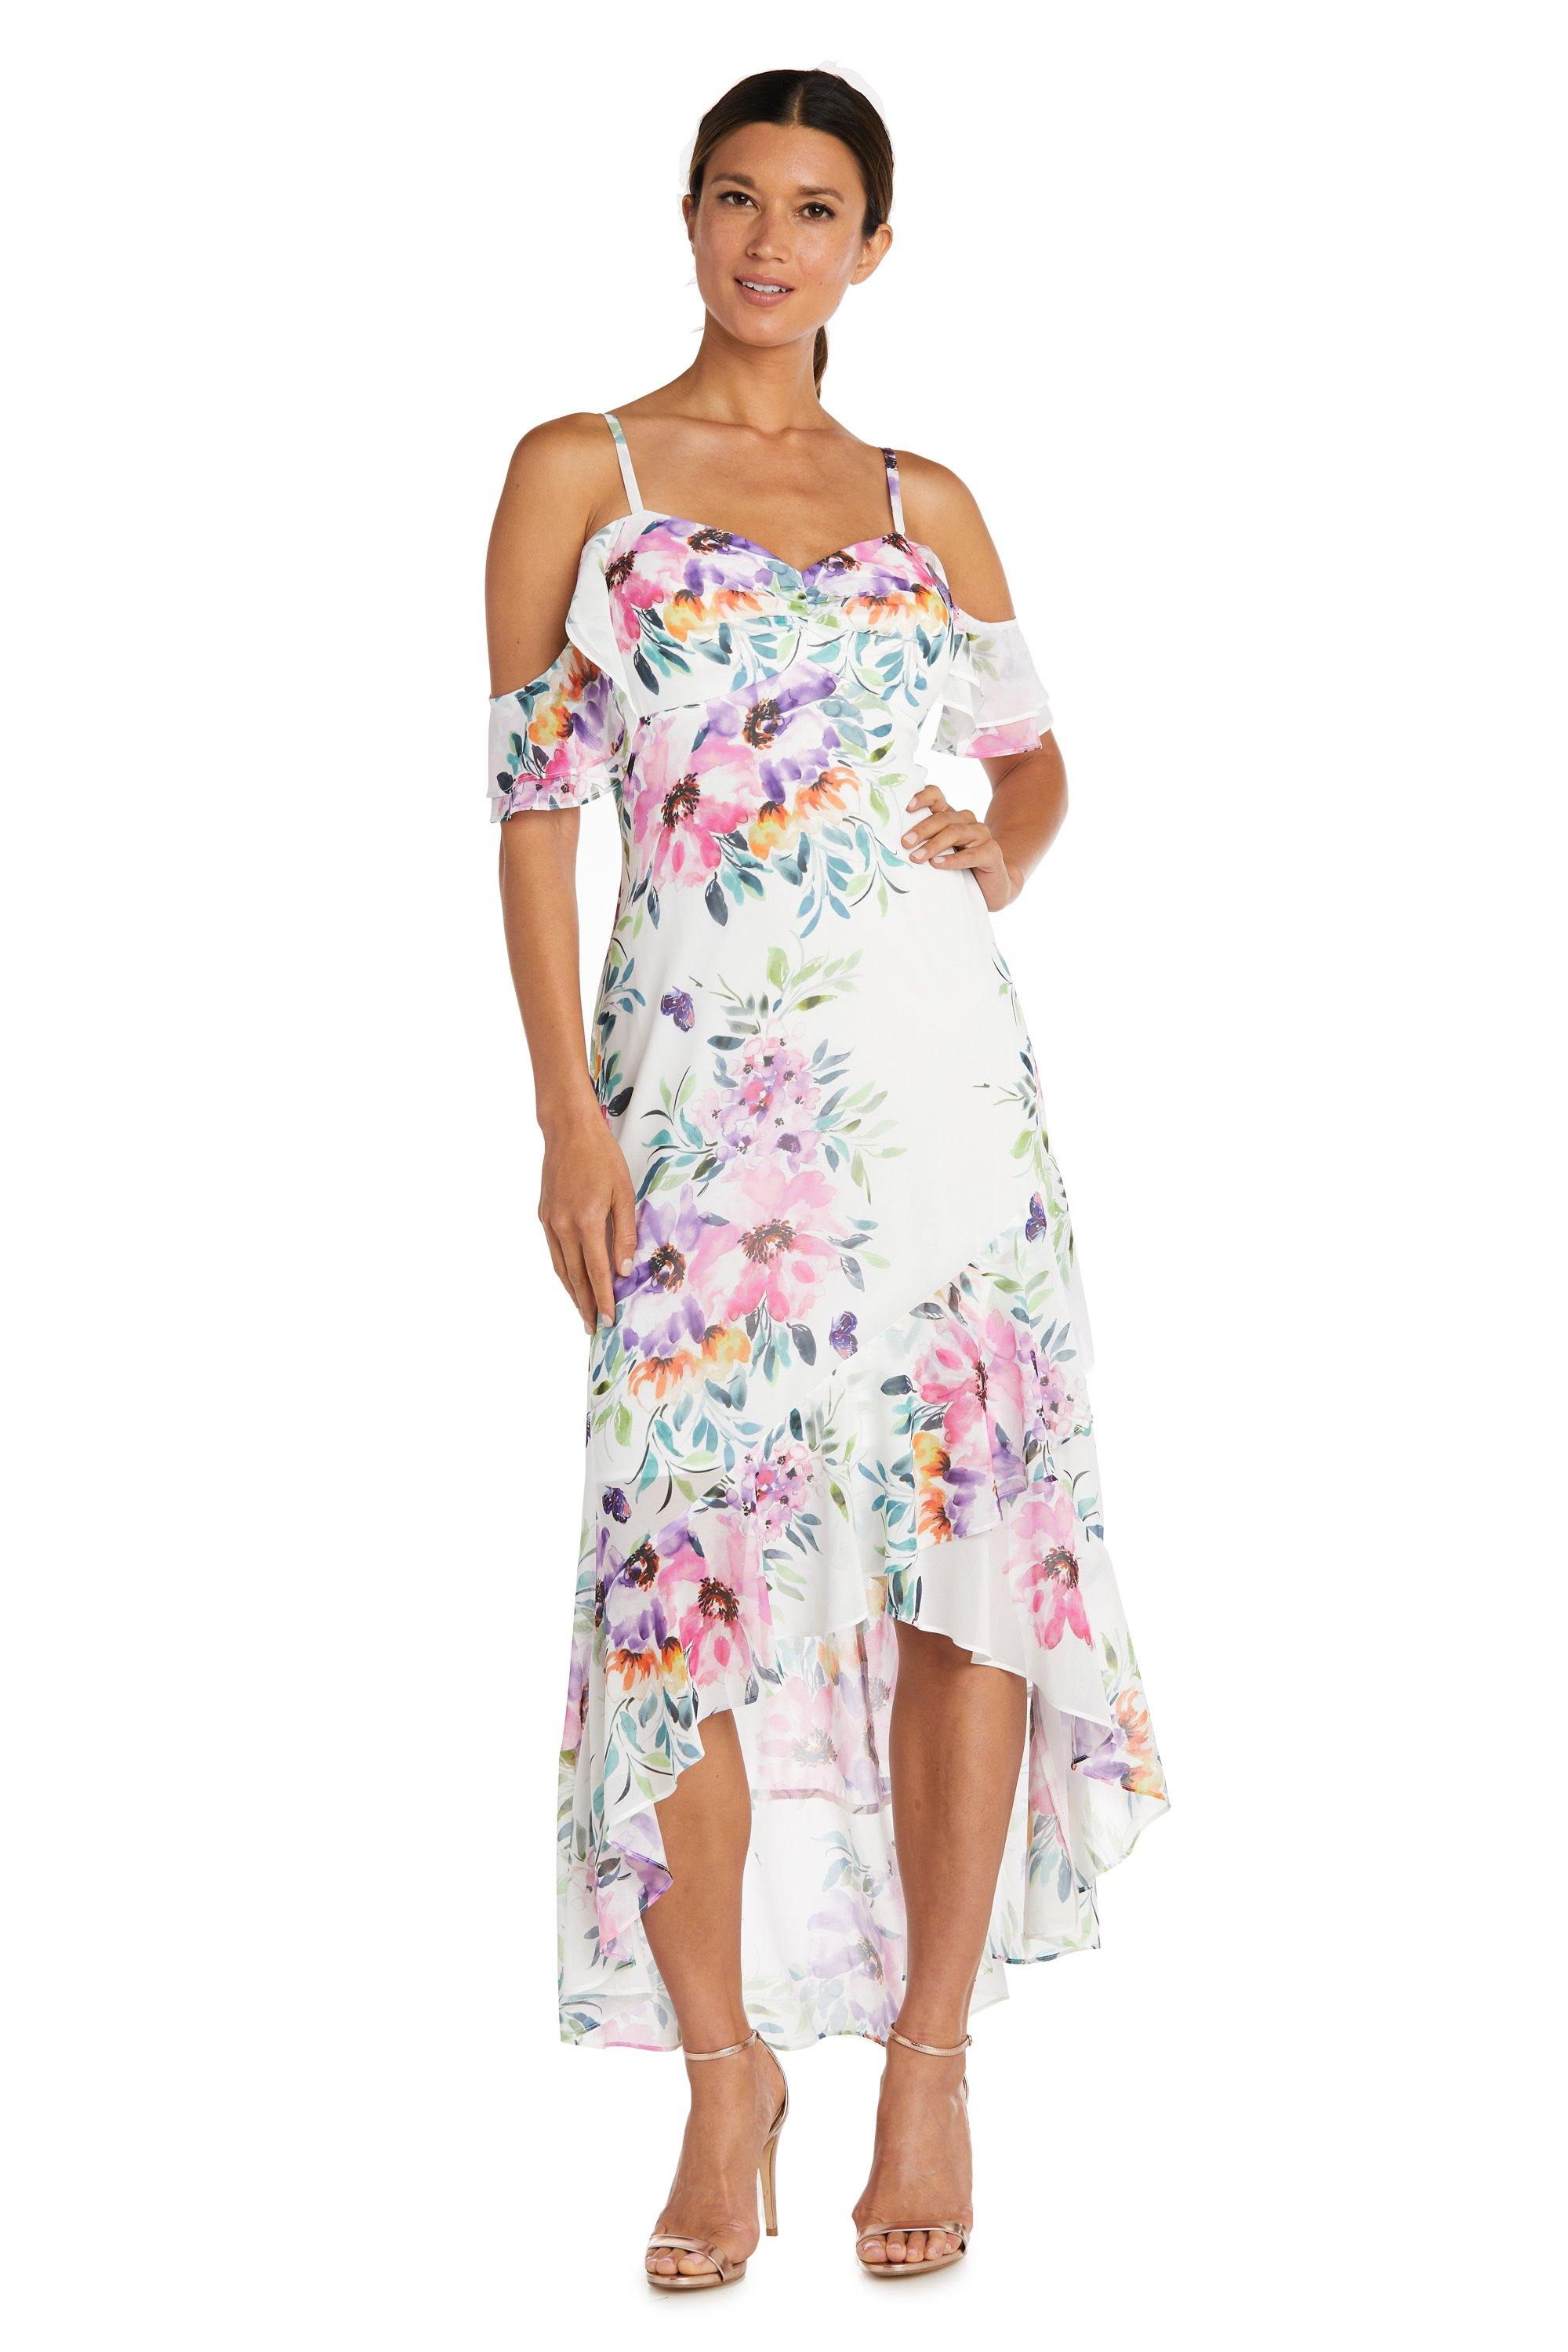 Nightway High Low Floral Print Dress Sale - The Dress Outlet